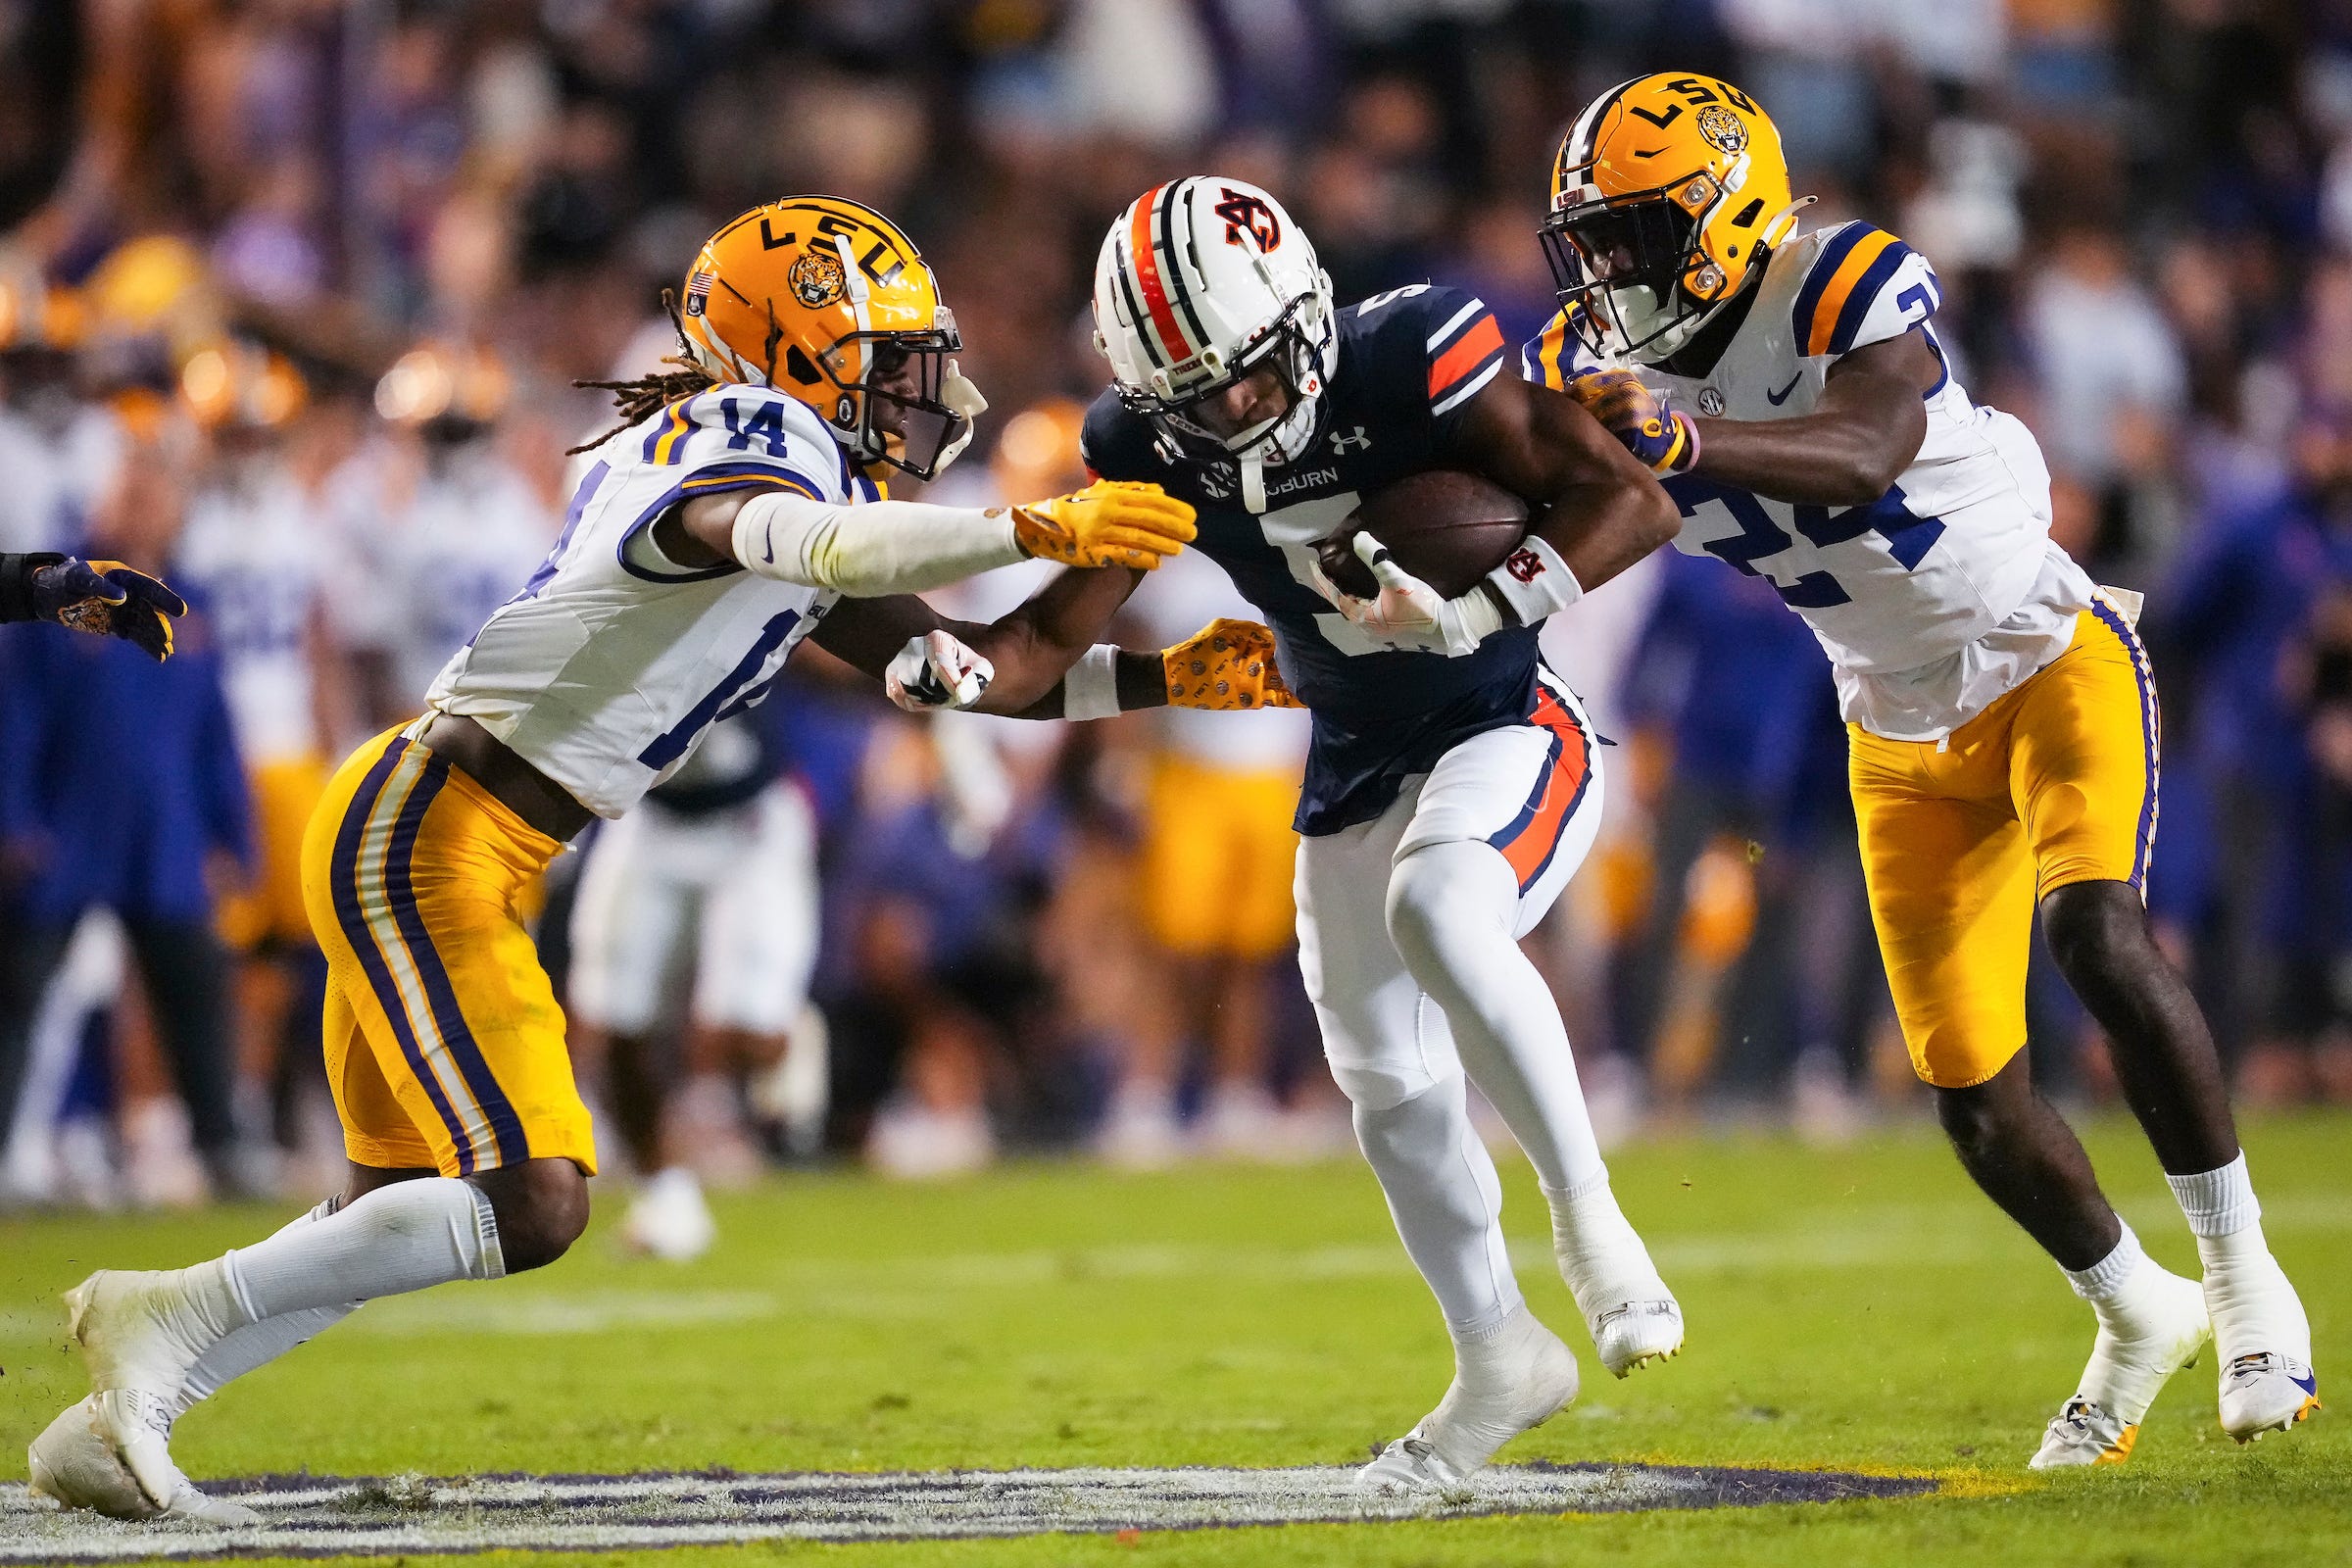 Road game against Tide a tough challenge for Tigers, Sports